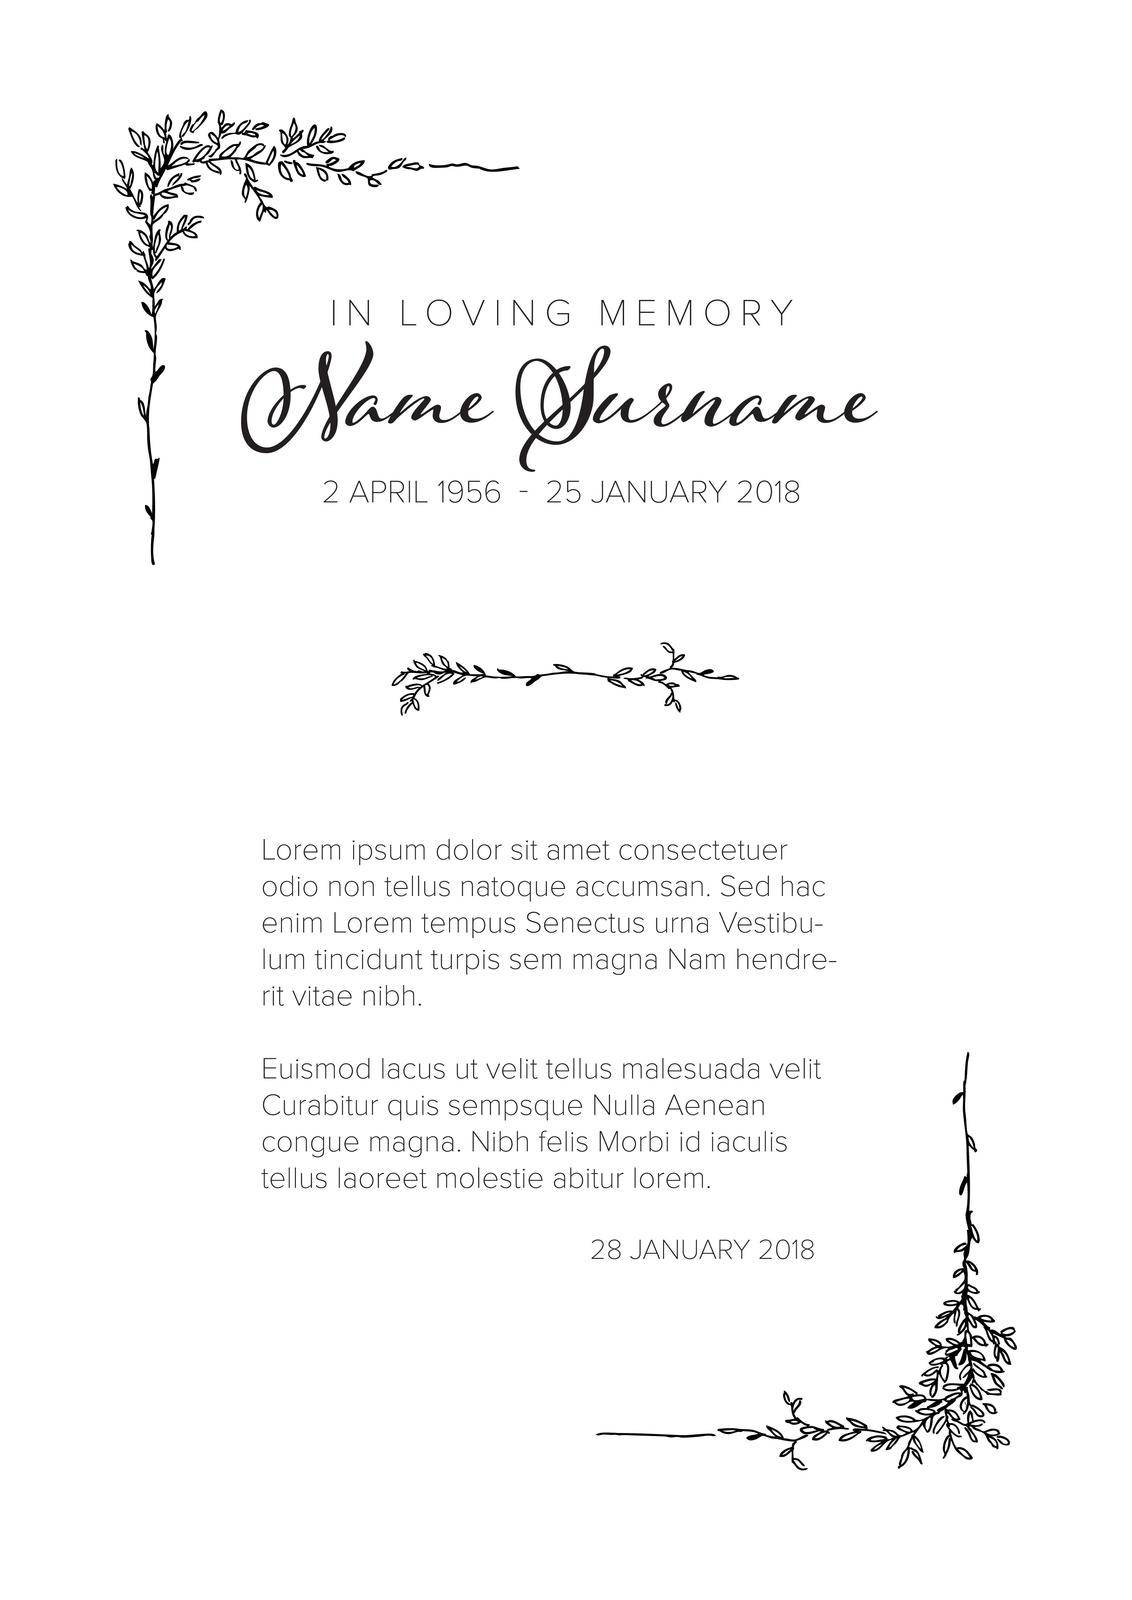 Funeral condolence death notice card template with handdrawn floral elements